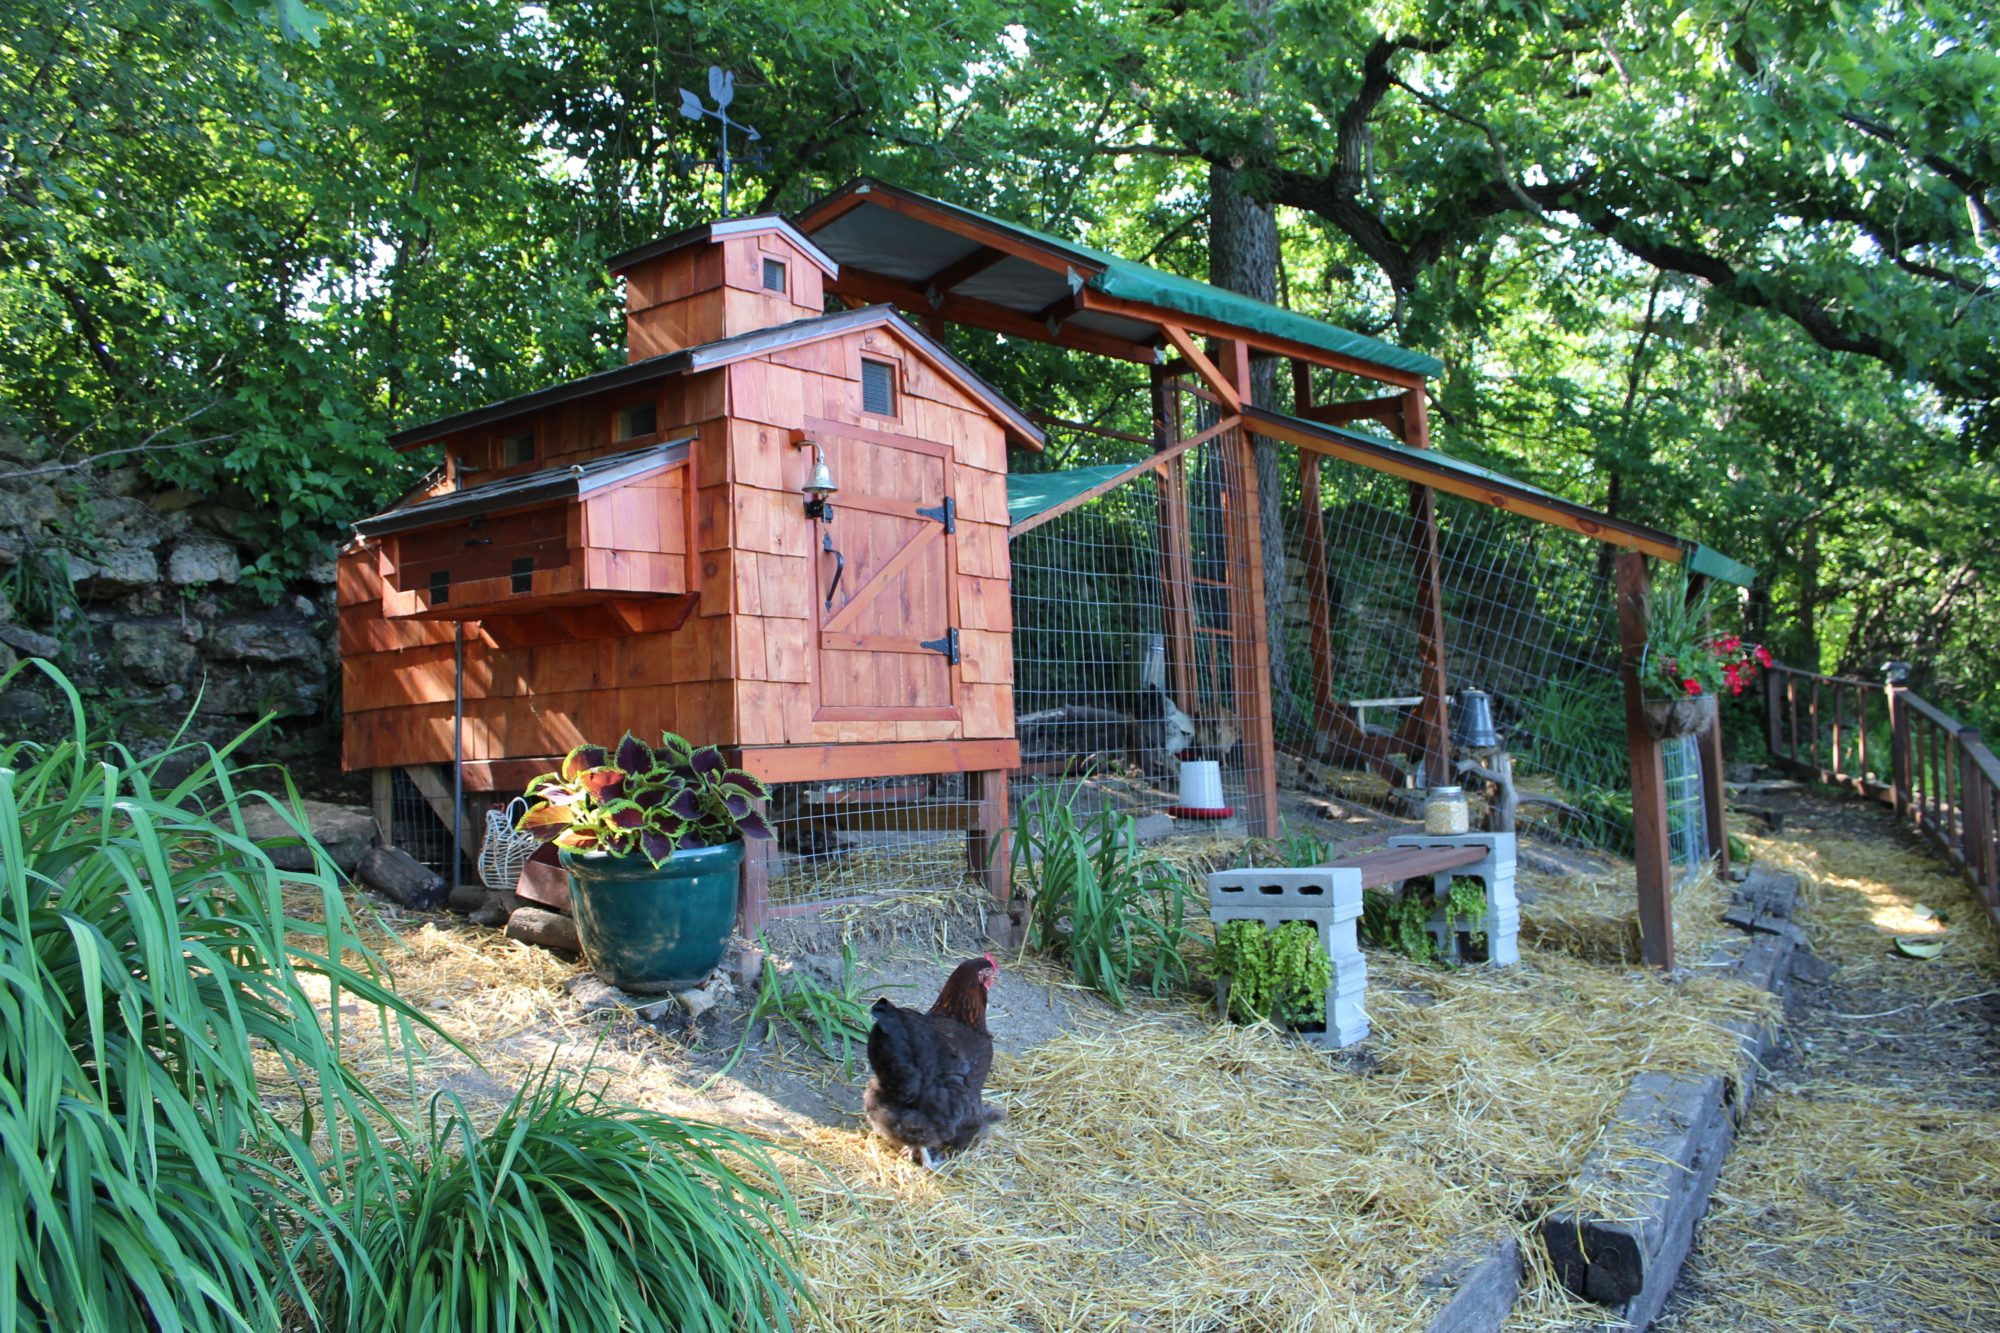 Iowa Coop | BackYard Chickens - Learn How to Raise Chickens